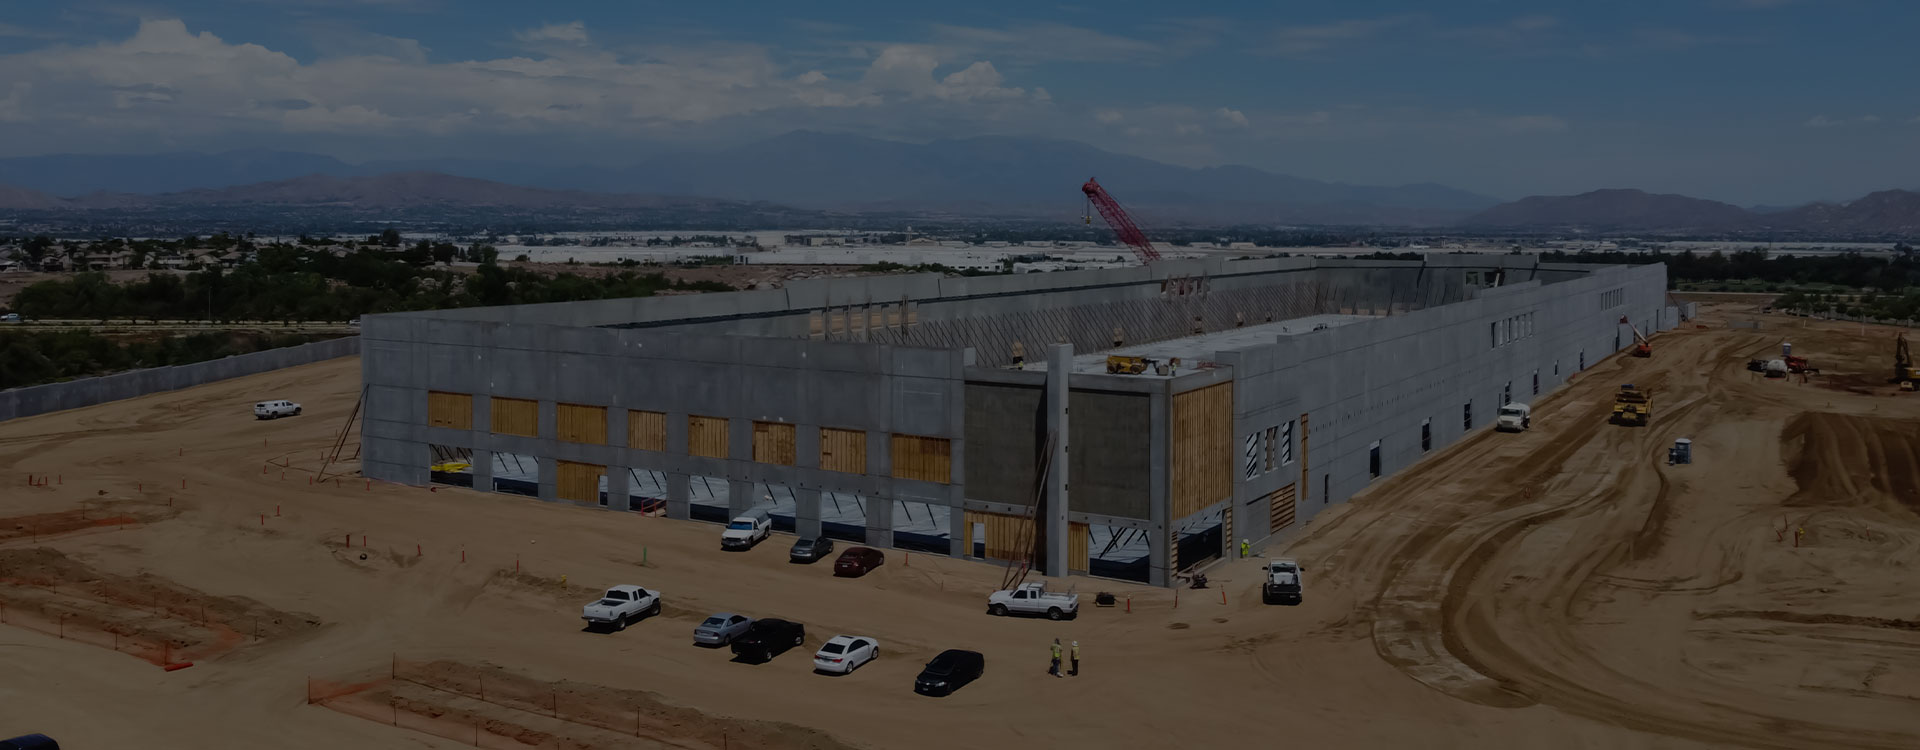 An aerial view of a large warehouse in the desert.